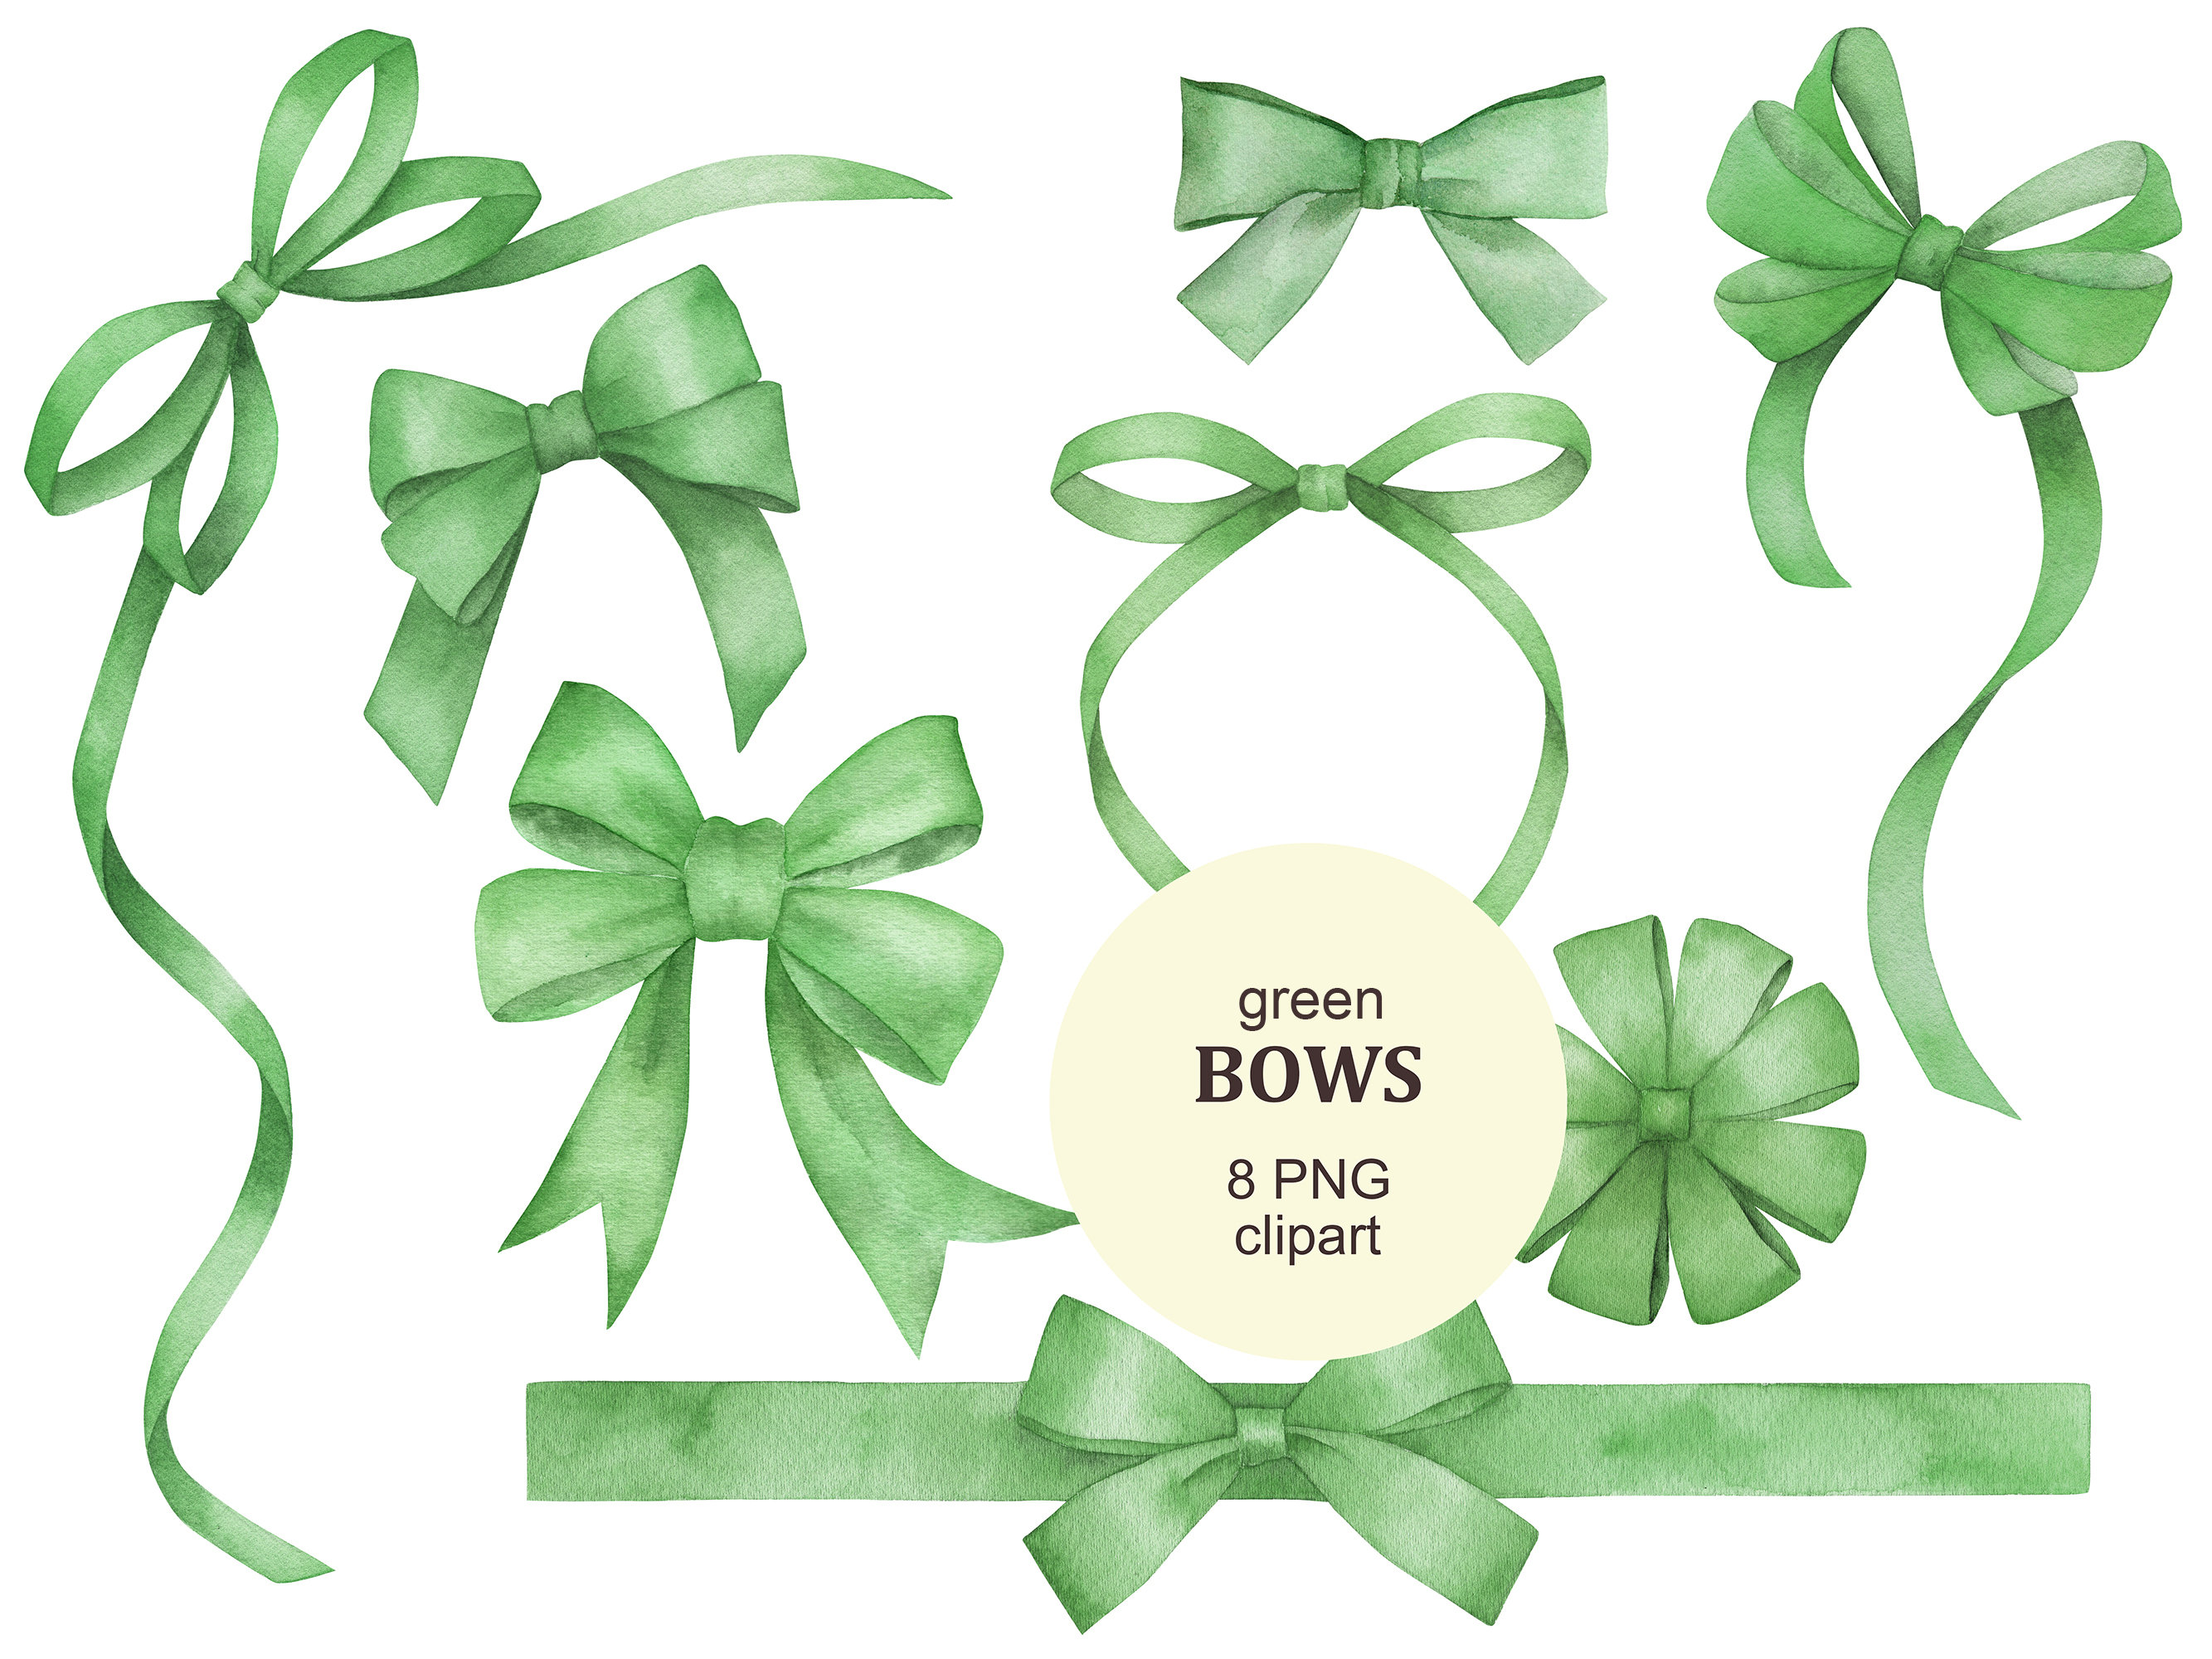 Christmas Ribbon Bow Decoration With Holly, Greeting Card, Gift Ribbon,  Gift Bow PNG Transparent Image and Clipart for Free Download